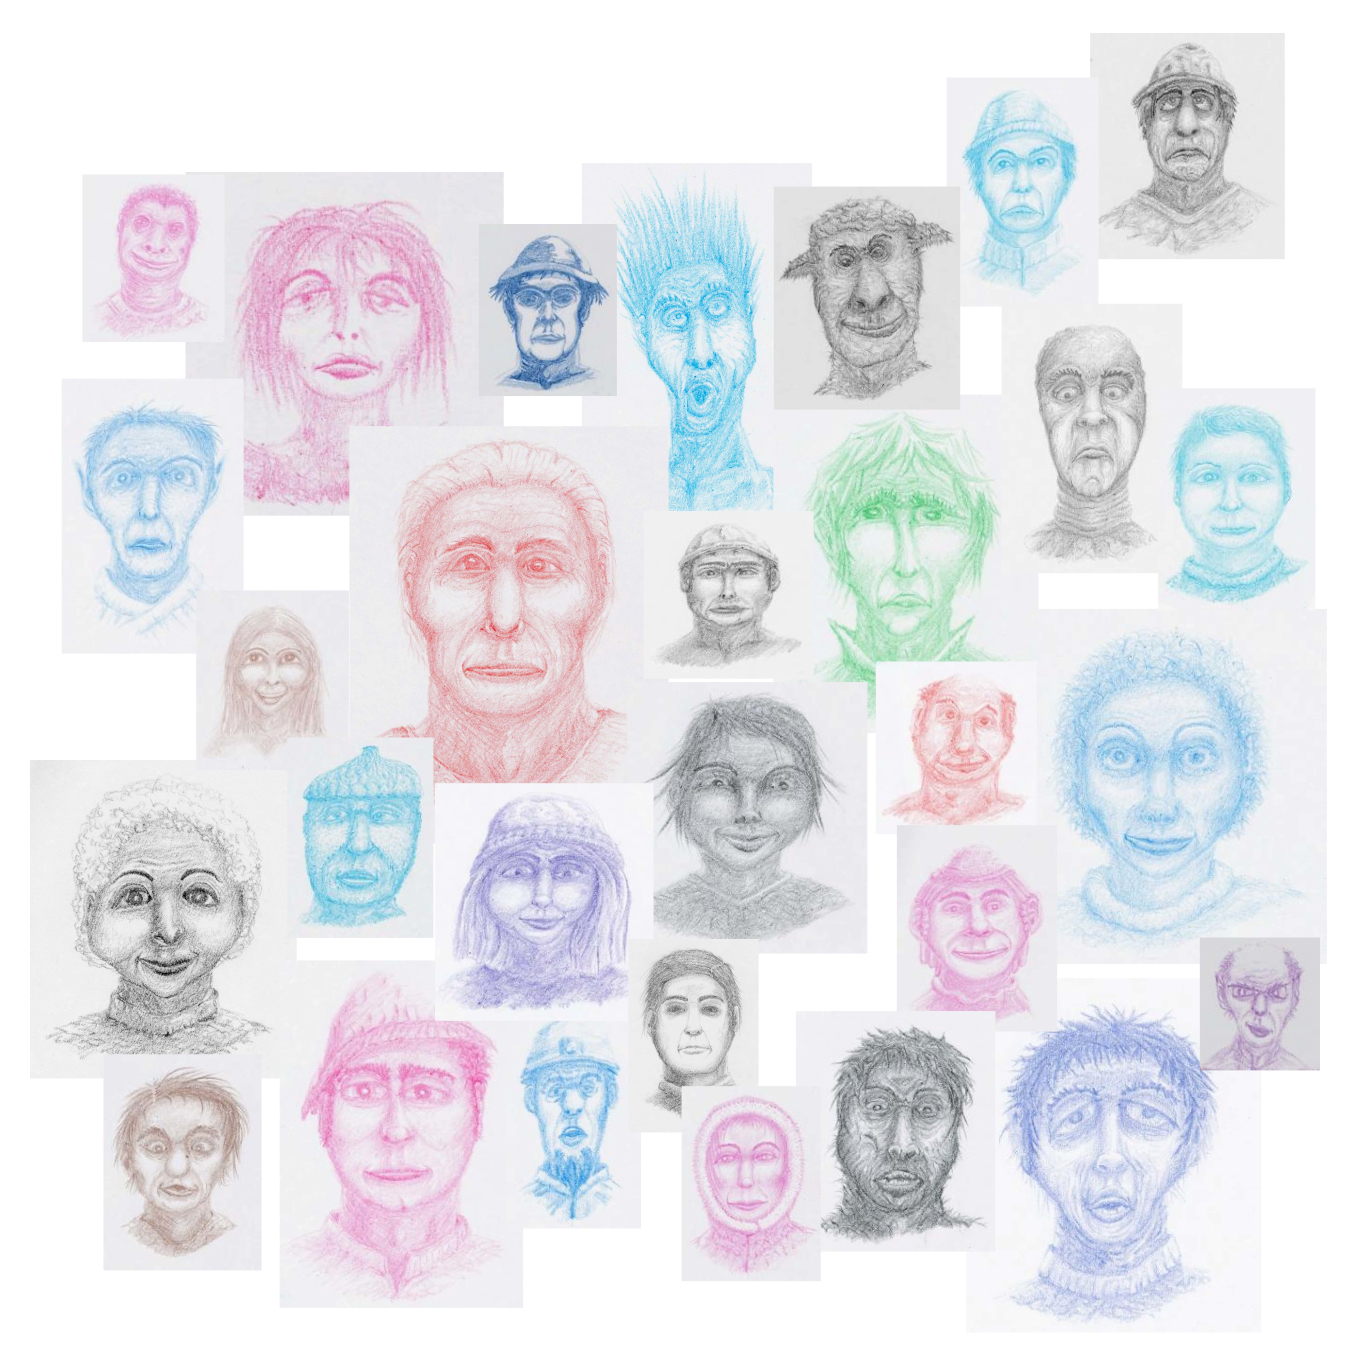 crayon drawings of many faces in different colors